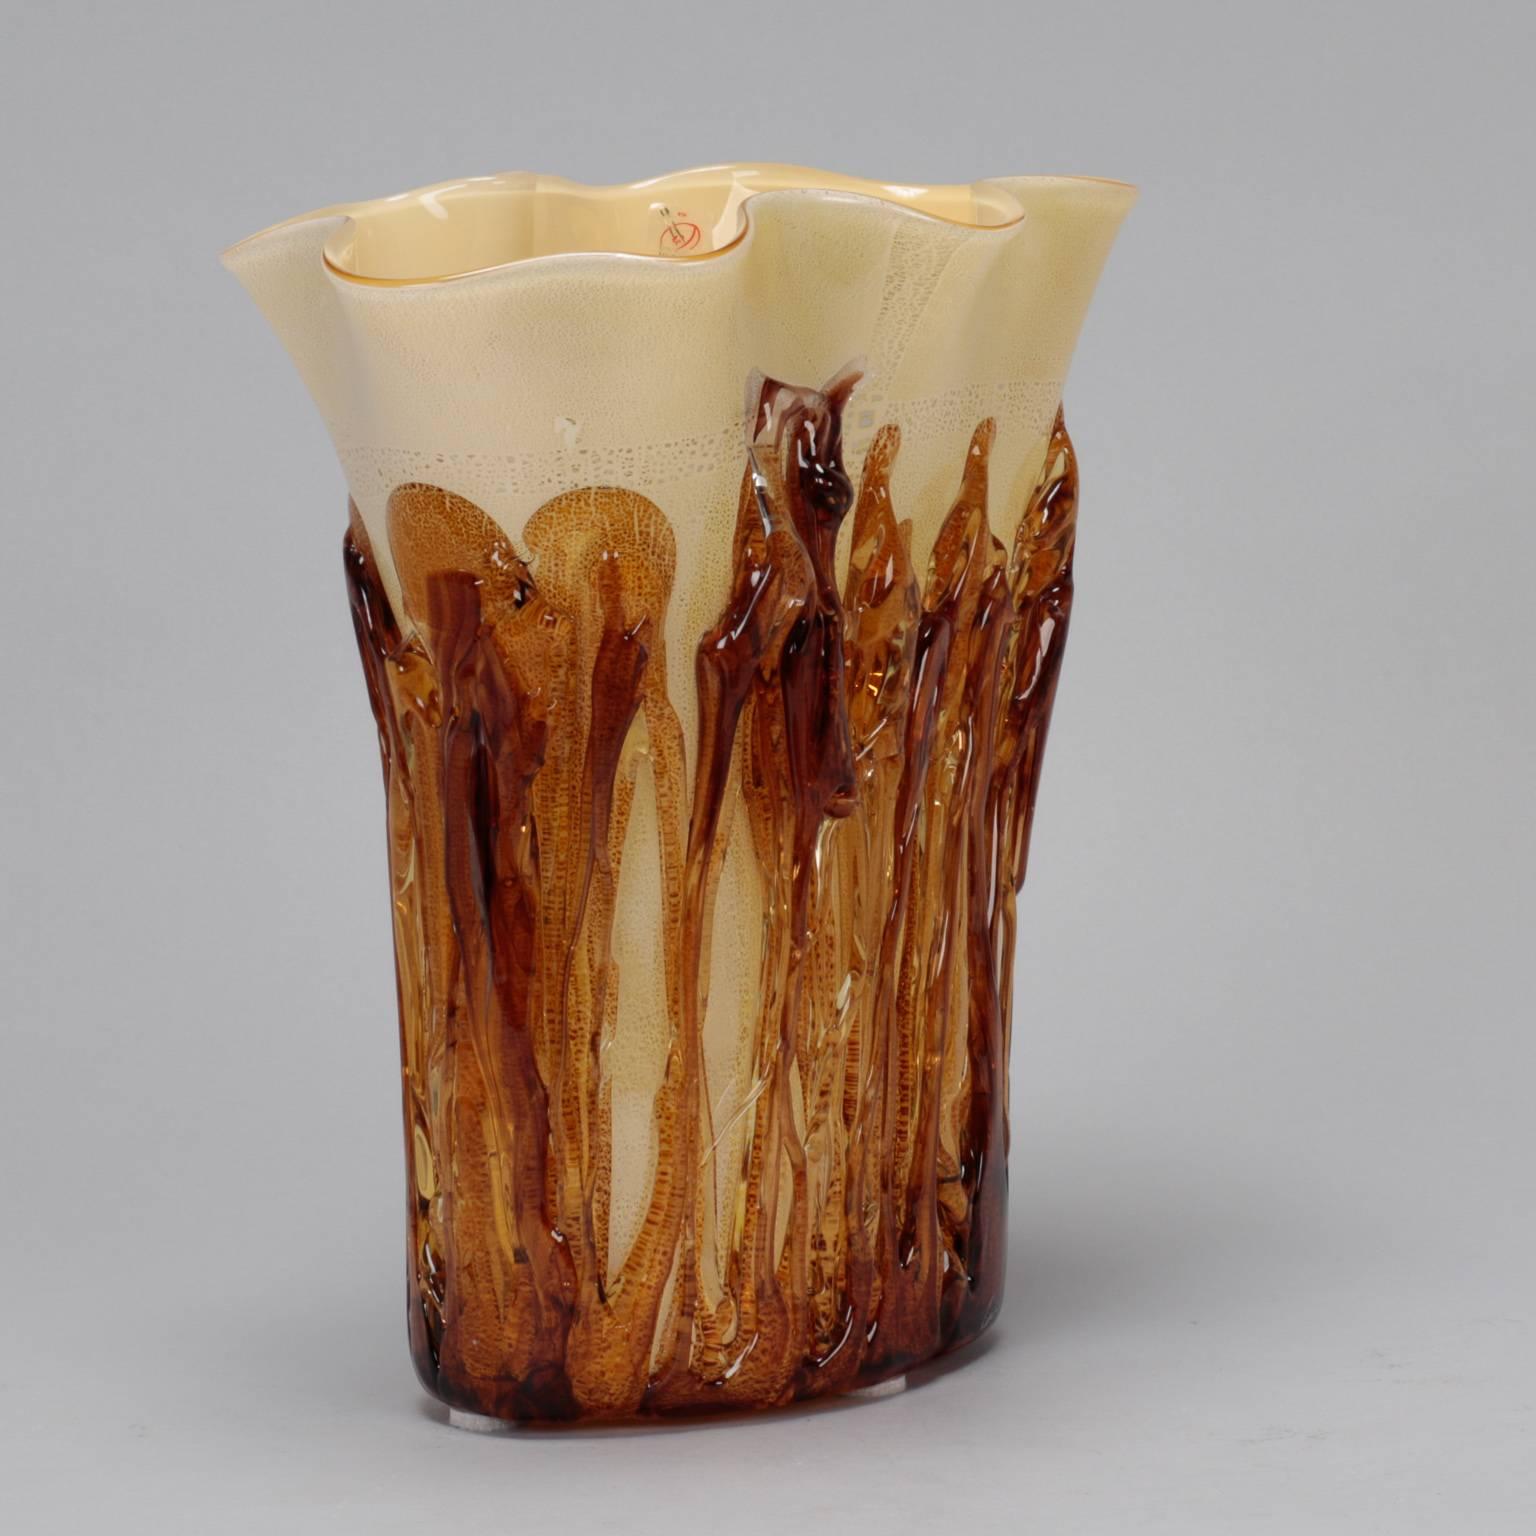 Tall cream color Murano vase encased in applied gold glass. 

Cream colored vase is just over 12” tall with a flared and slightly ruffled rim, circa 1990s. Amber colored glass strings encase the bottom and sides for textural and colorful accent.